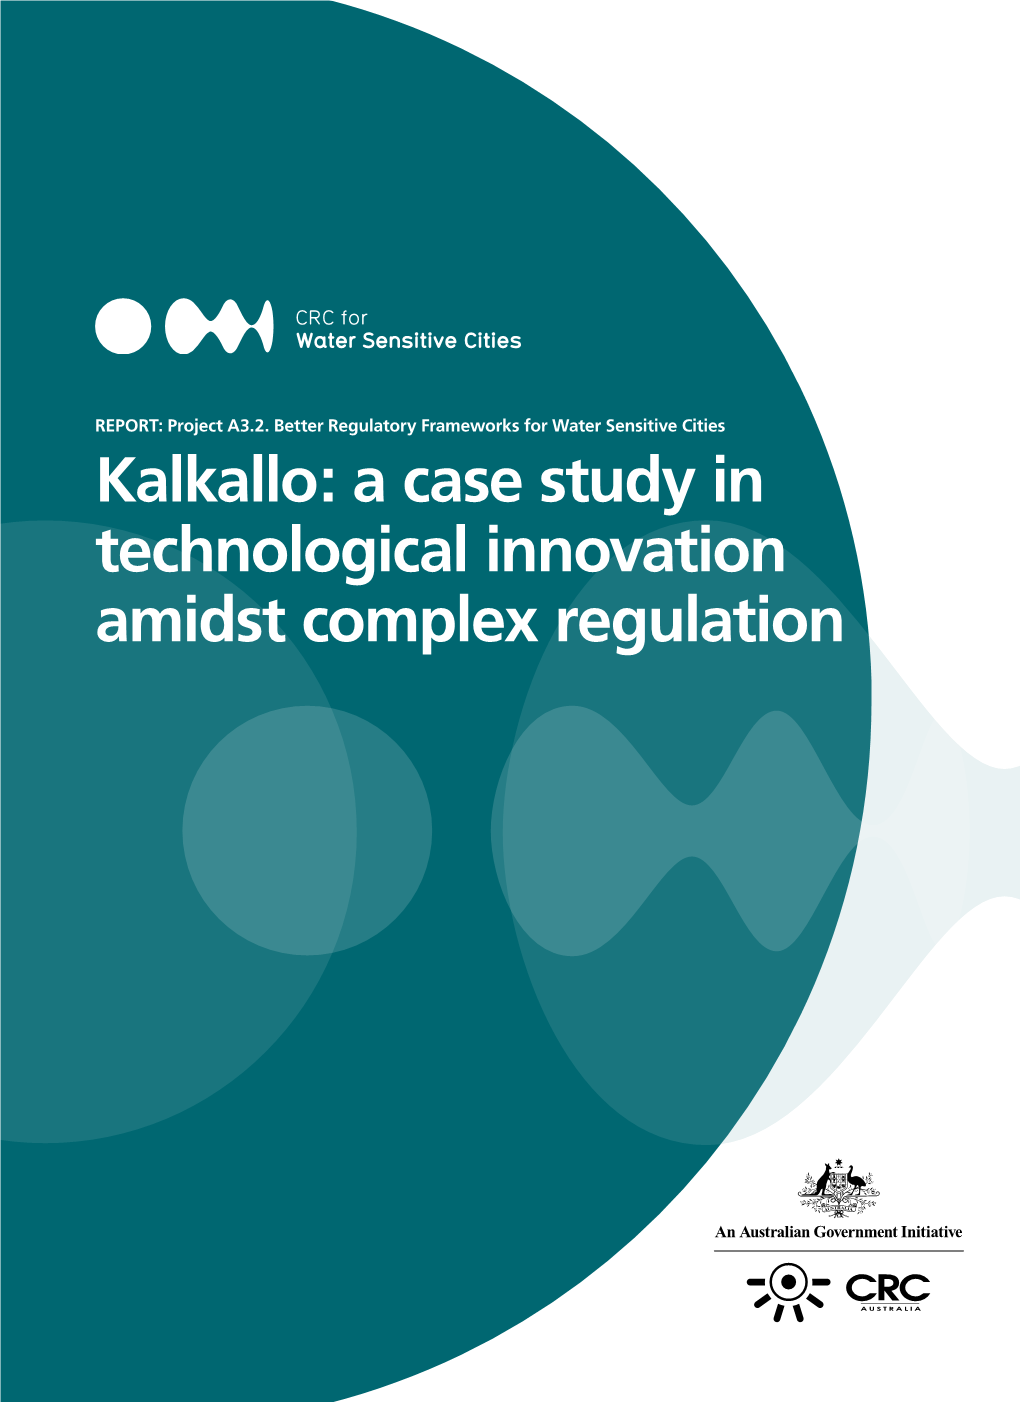 Kalkallo: a Case Study in Technological Innovation Amidst Complex Regulation